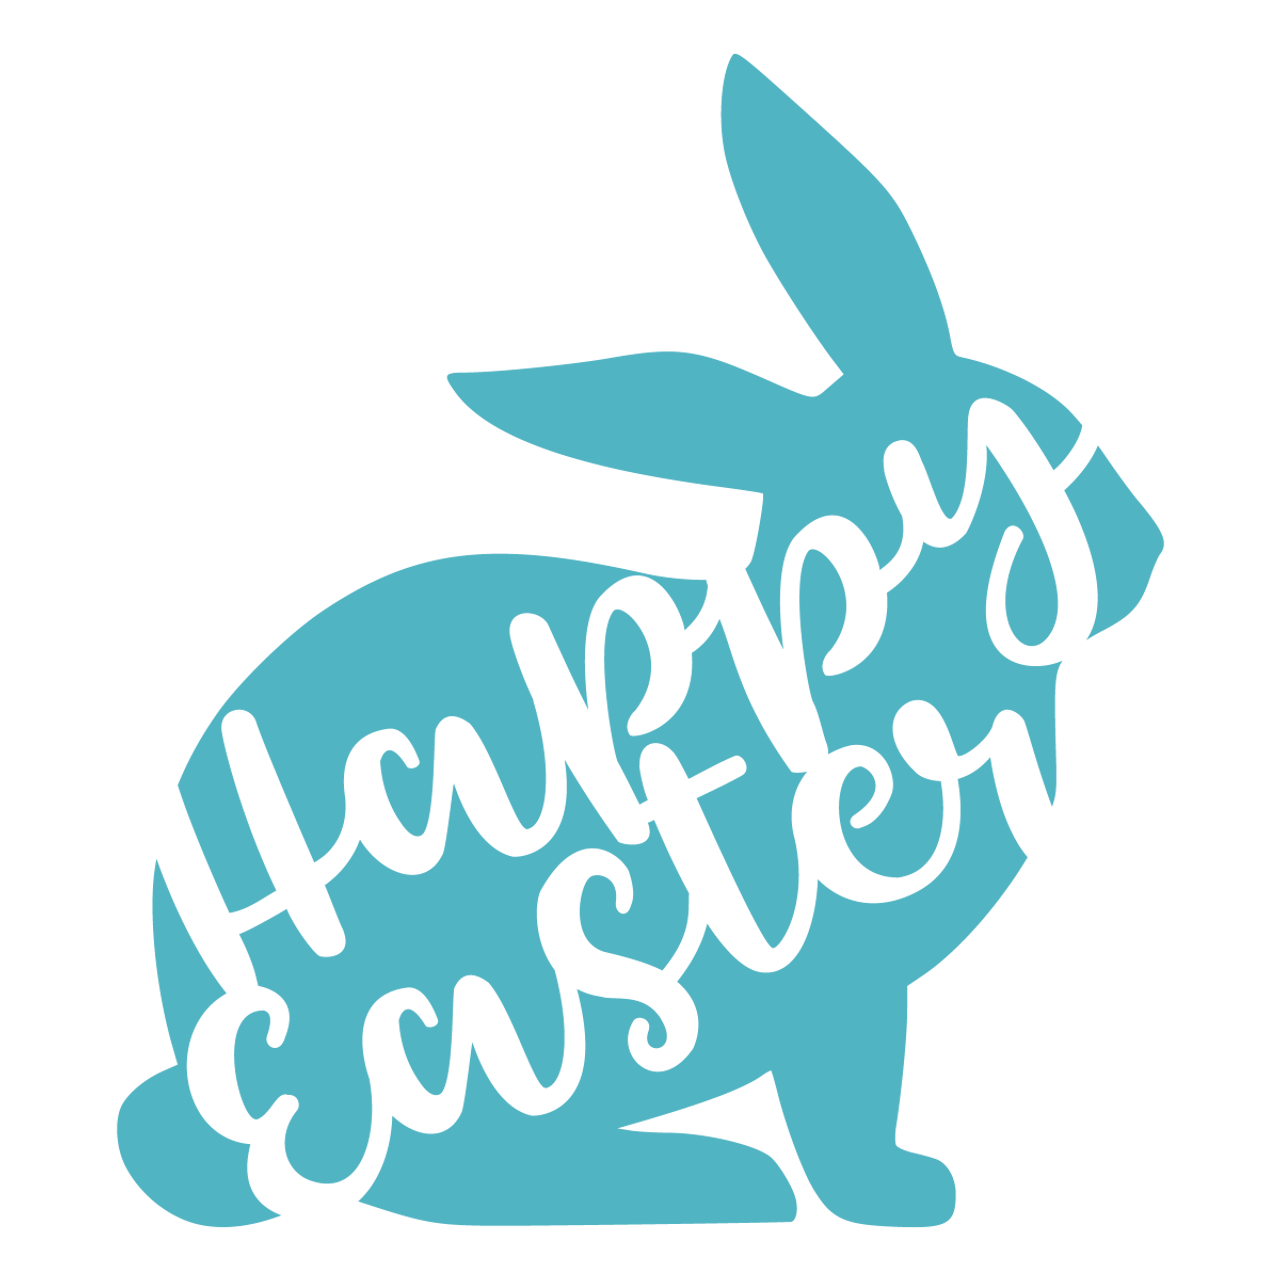 Happy Easter SVG - SVG EPS PNG DXF Cut Files for Cricut and Silhouette